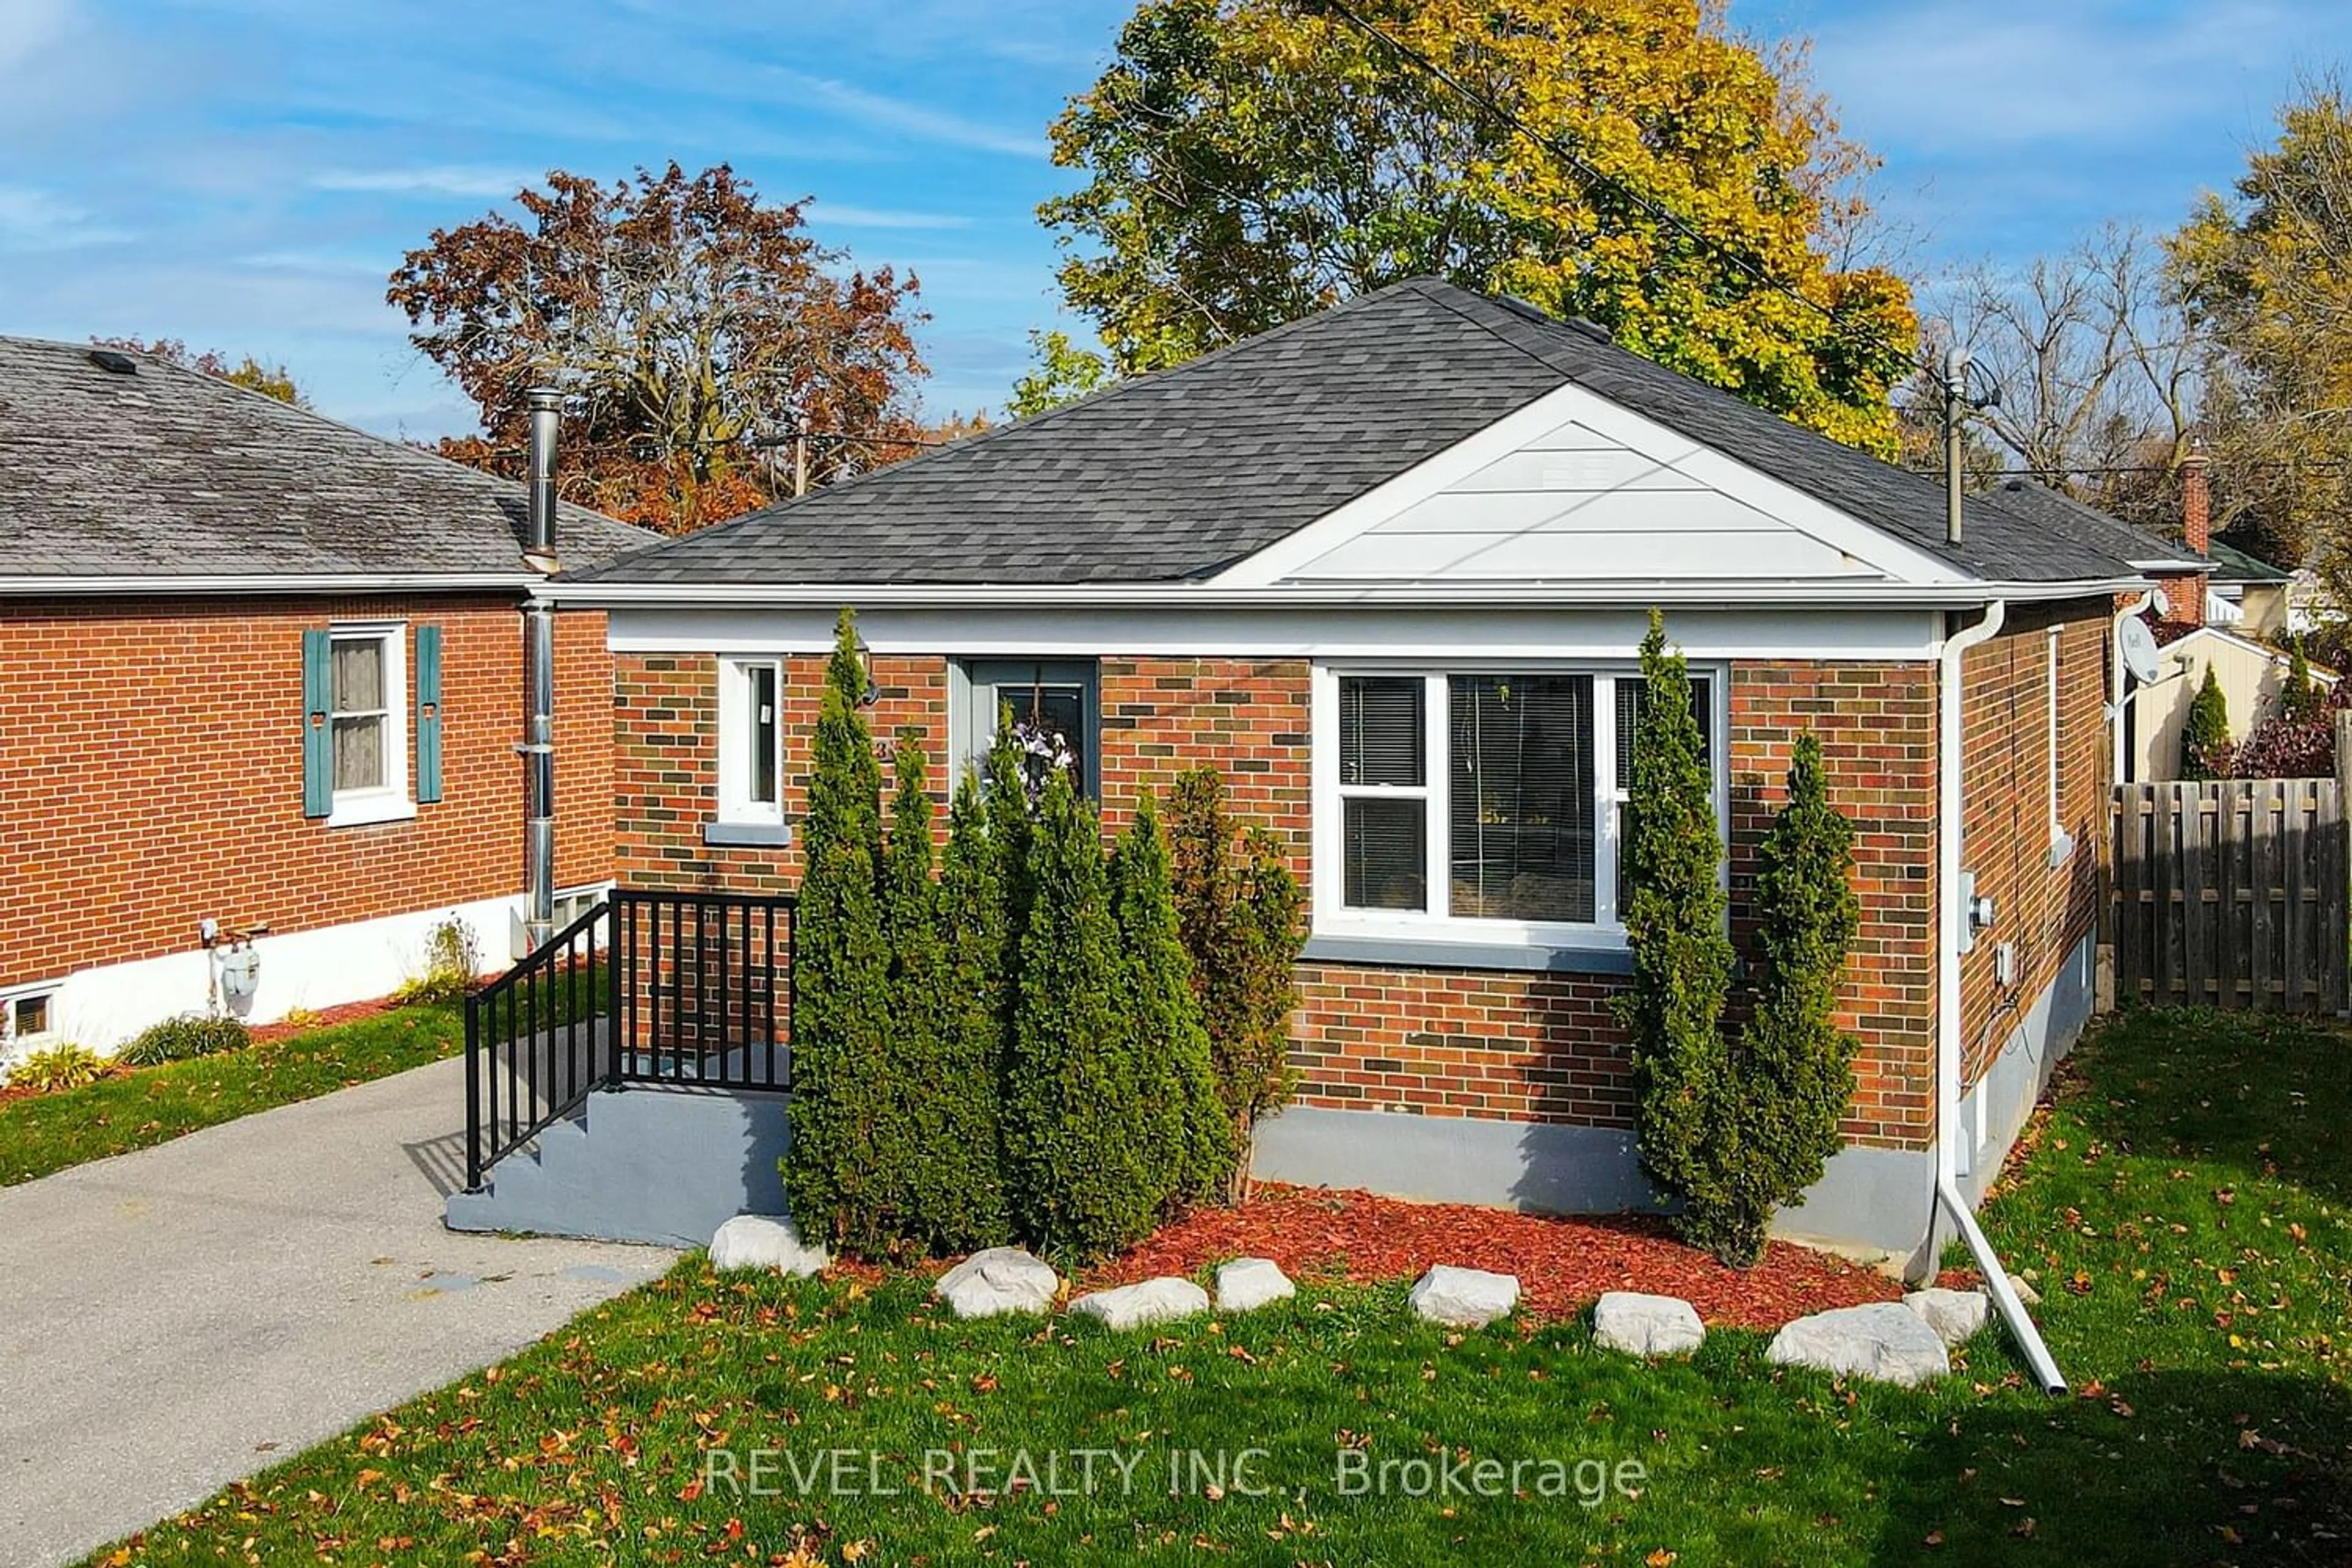 Home with brick exterior material for 303 Cadillac Ave, Oshawa Ontario L1H 5Z9